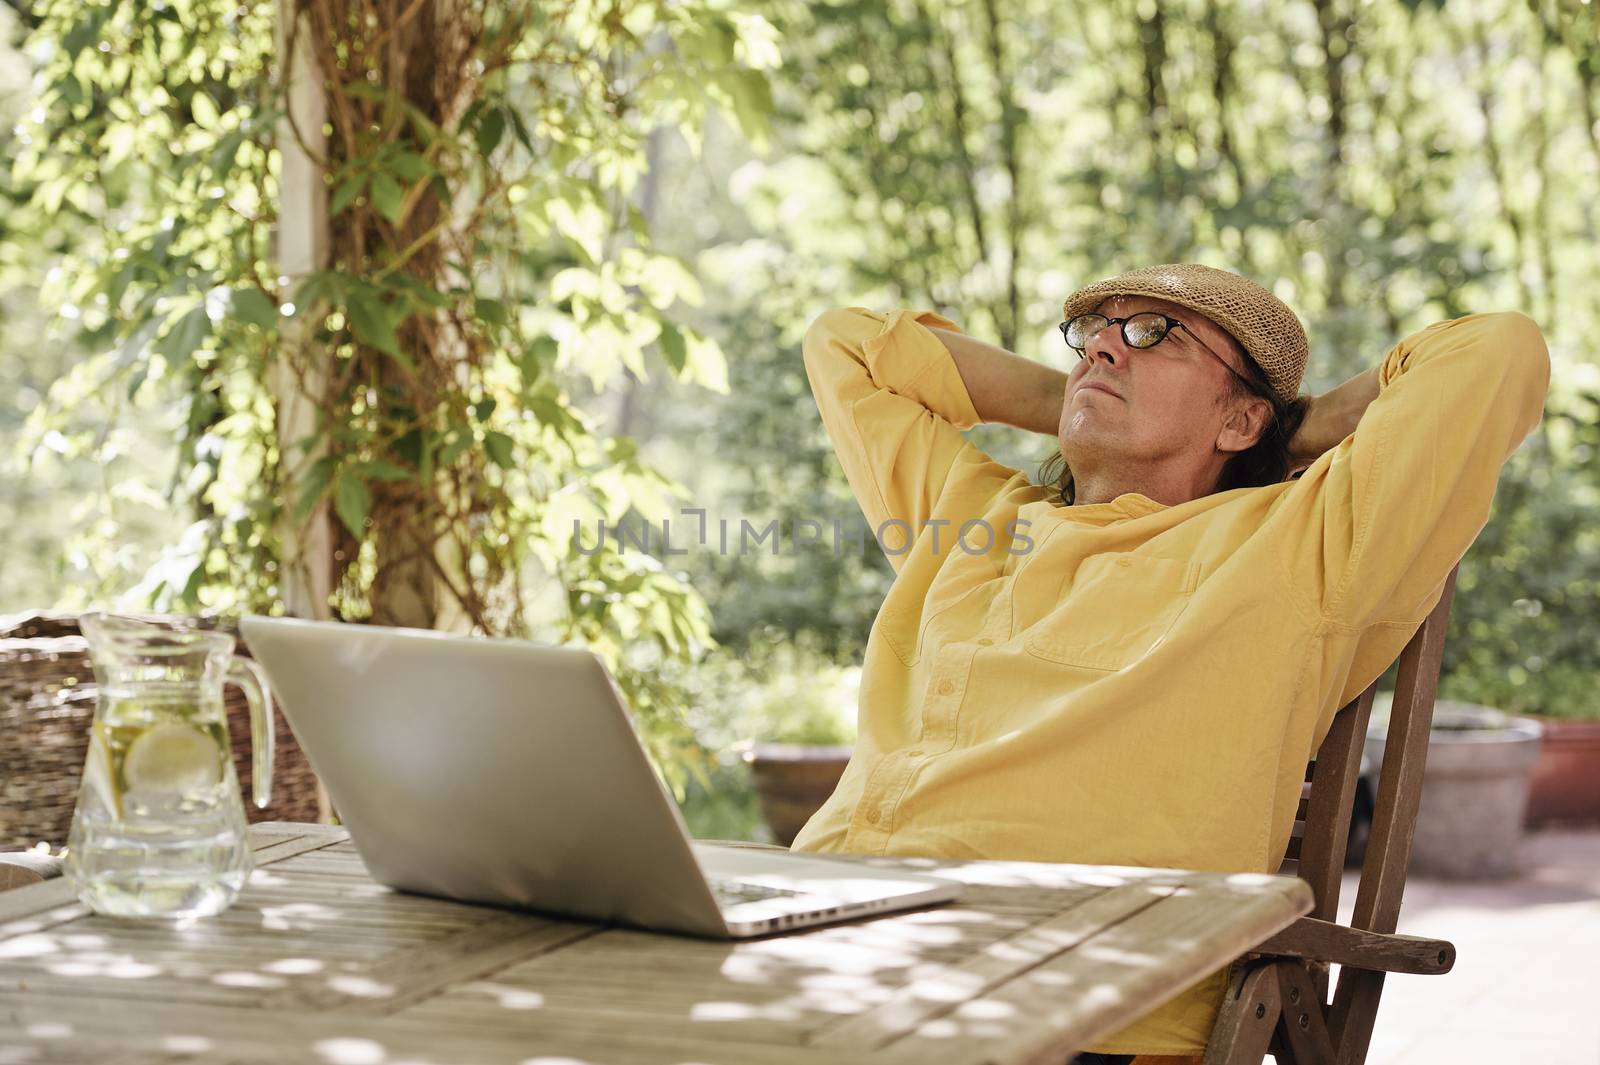 Senior man sits outdoors at a wooden table under a pergola and works on a laptop computer. It's summer and there's a background of green trees and bushes